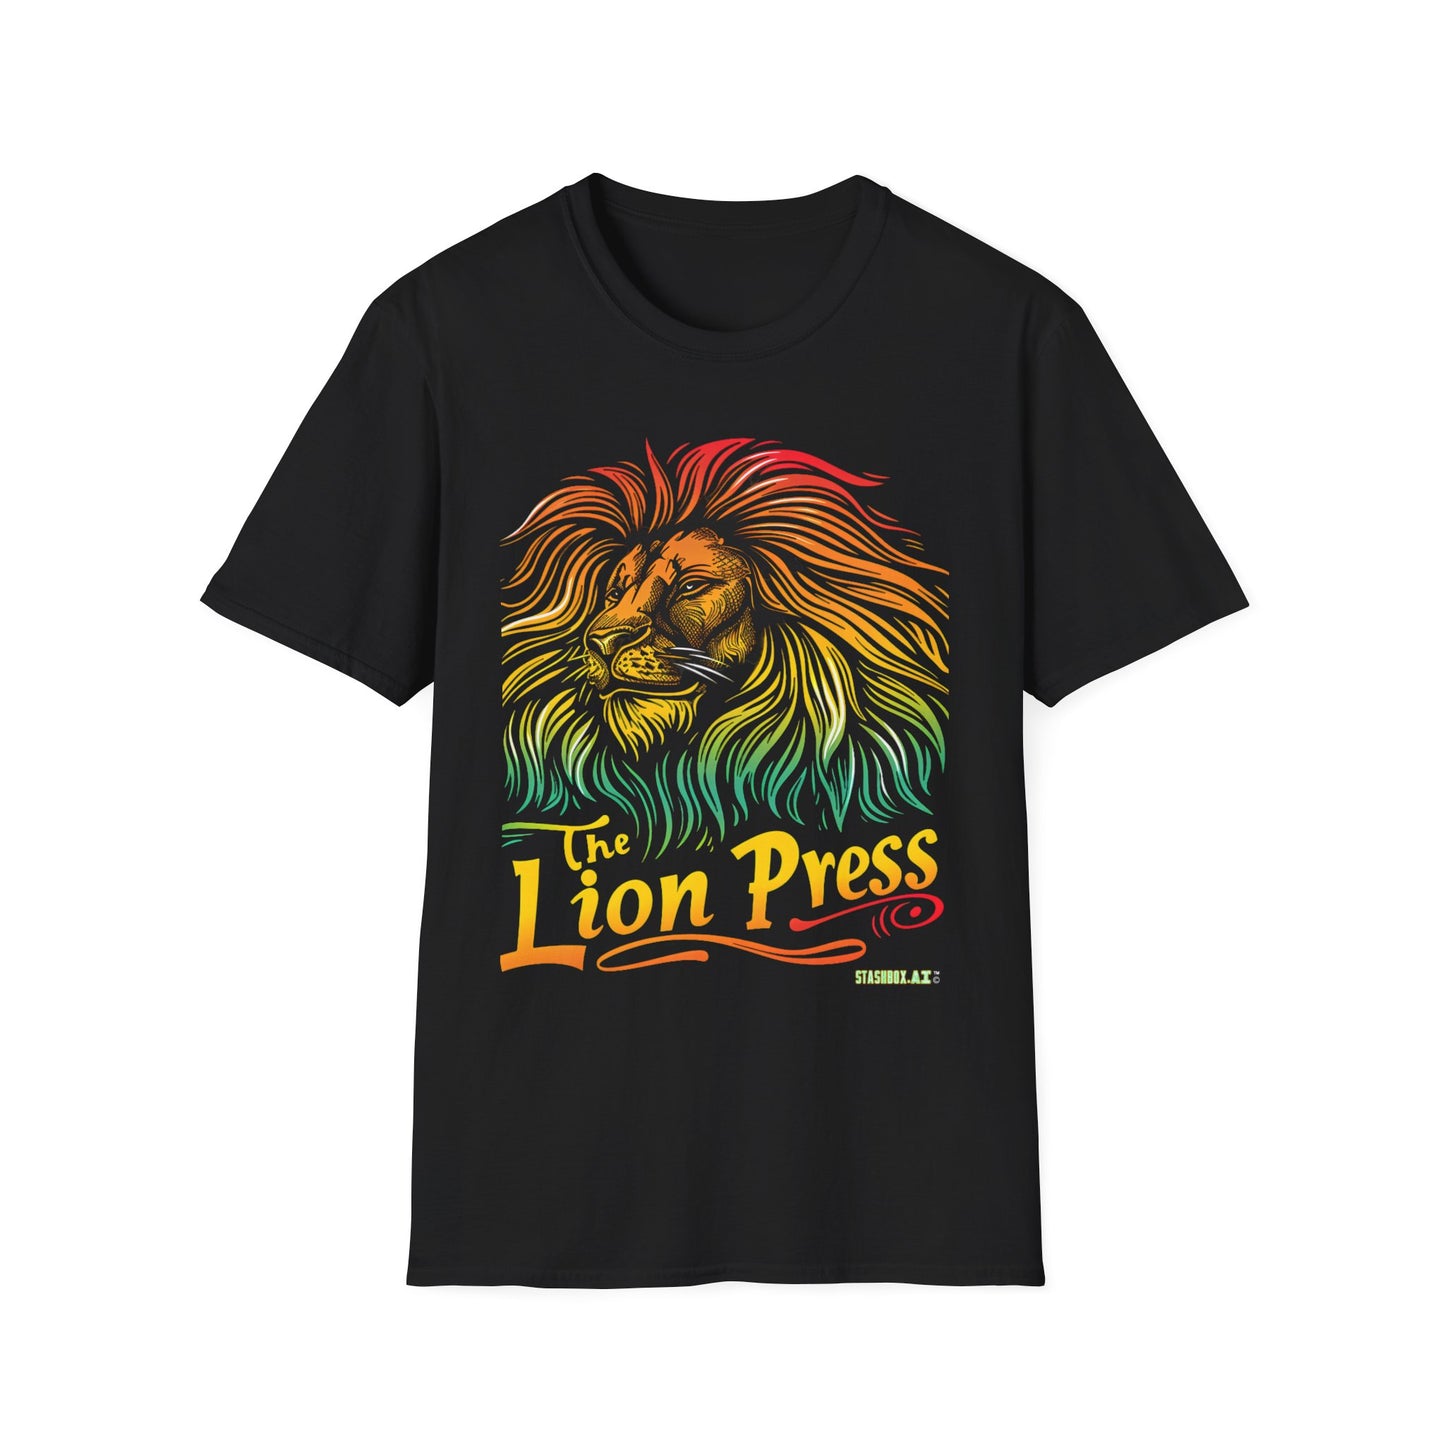 Tshirt Unisex Softstyle The Lion Press Green Yellow Red Tri-Color